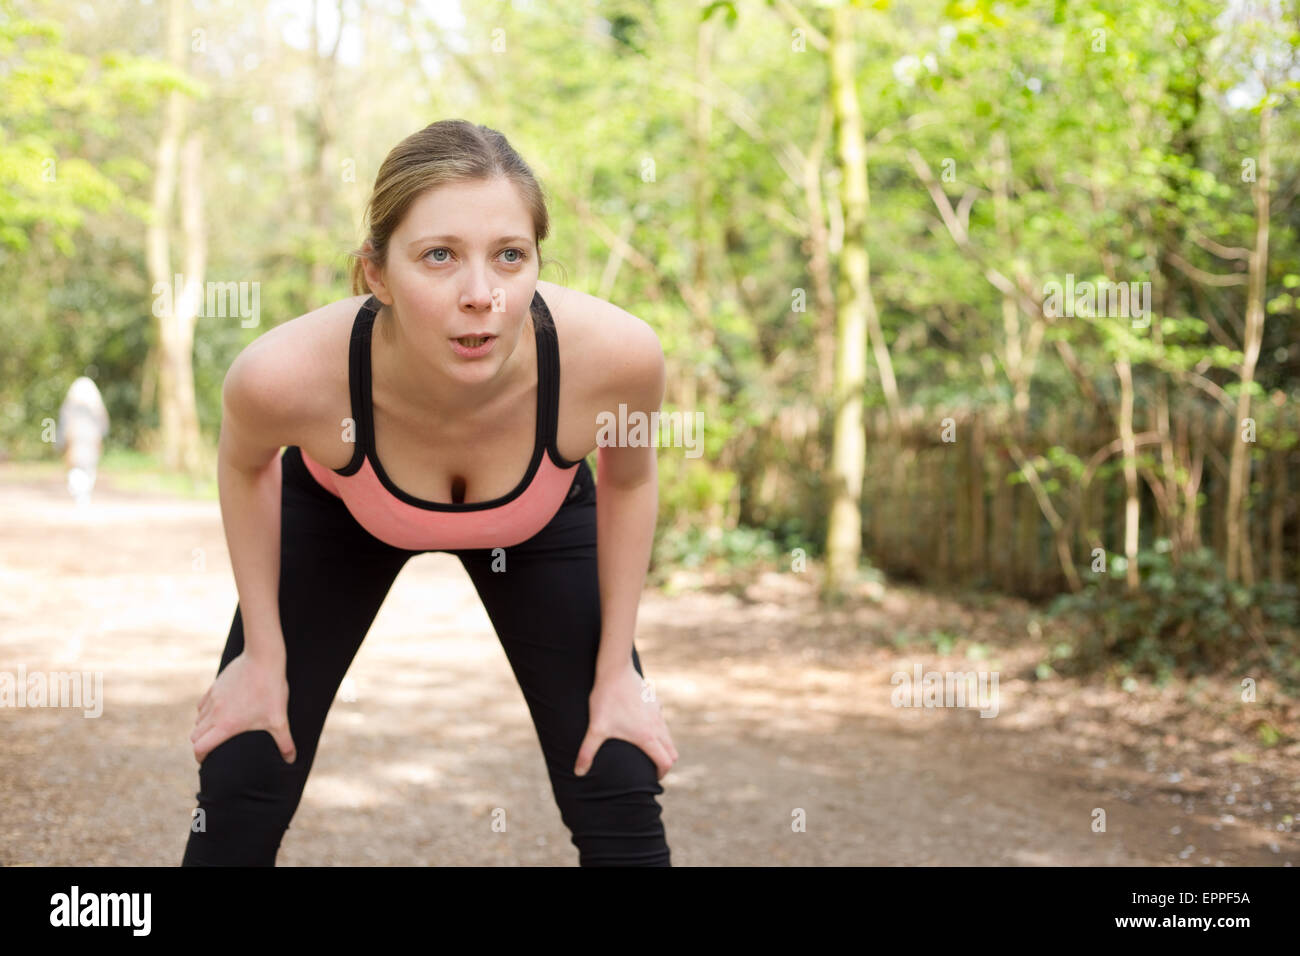 young woman catching her breath while out running Stock Photo